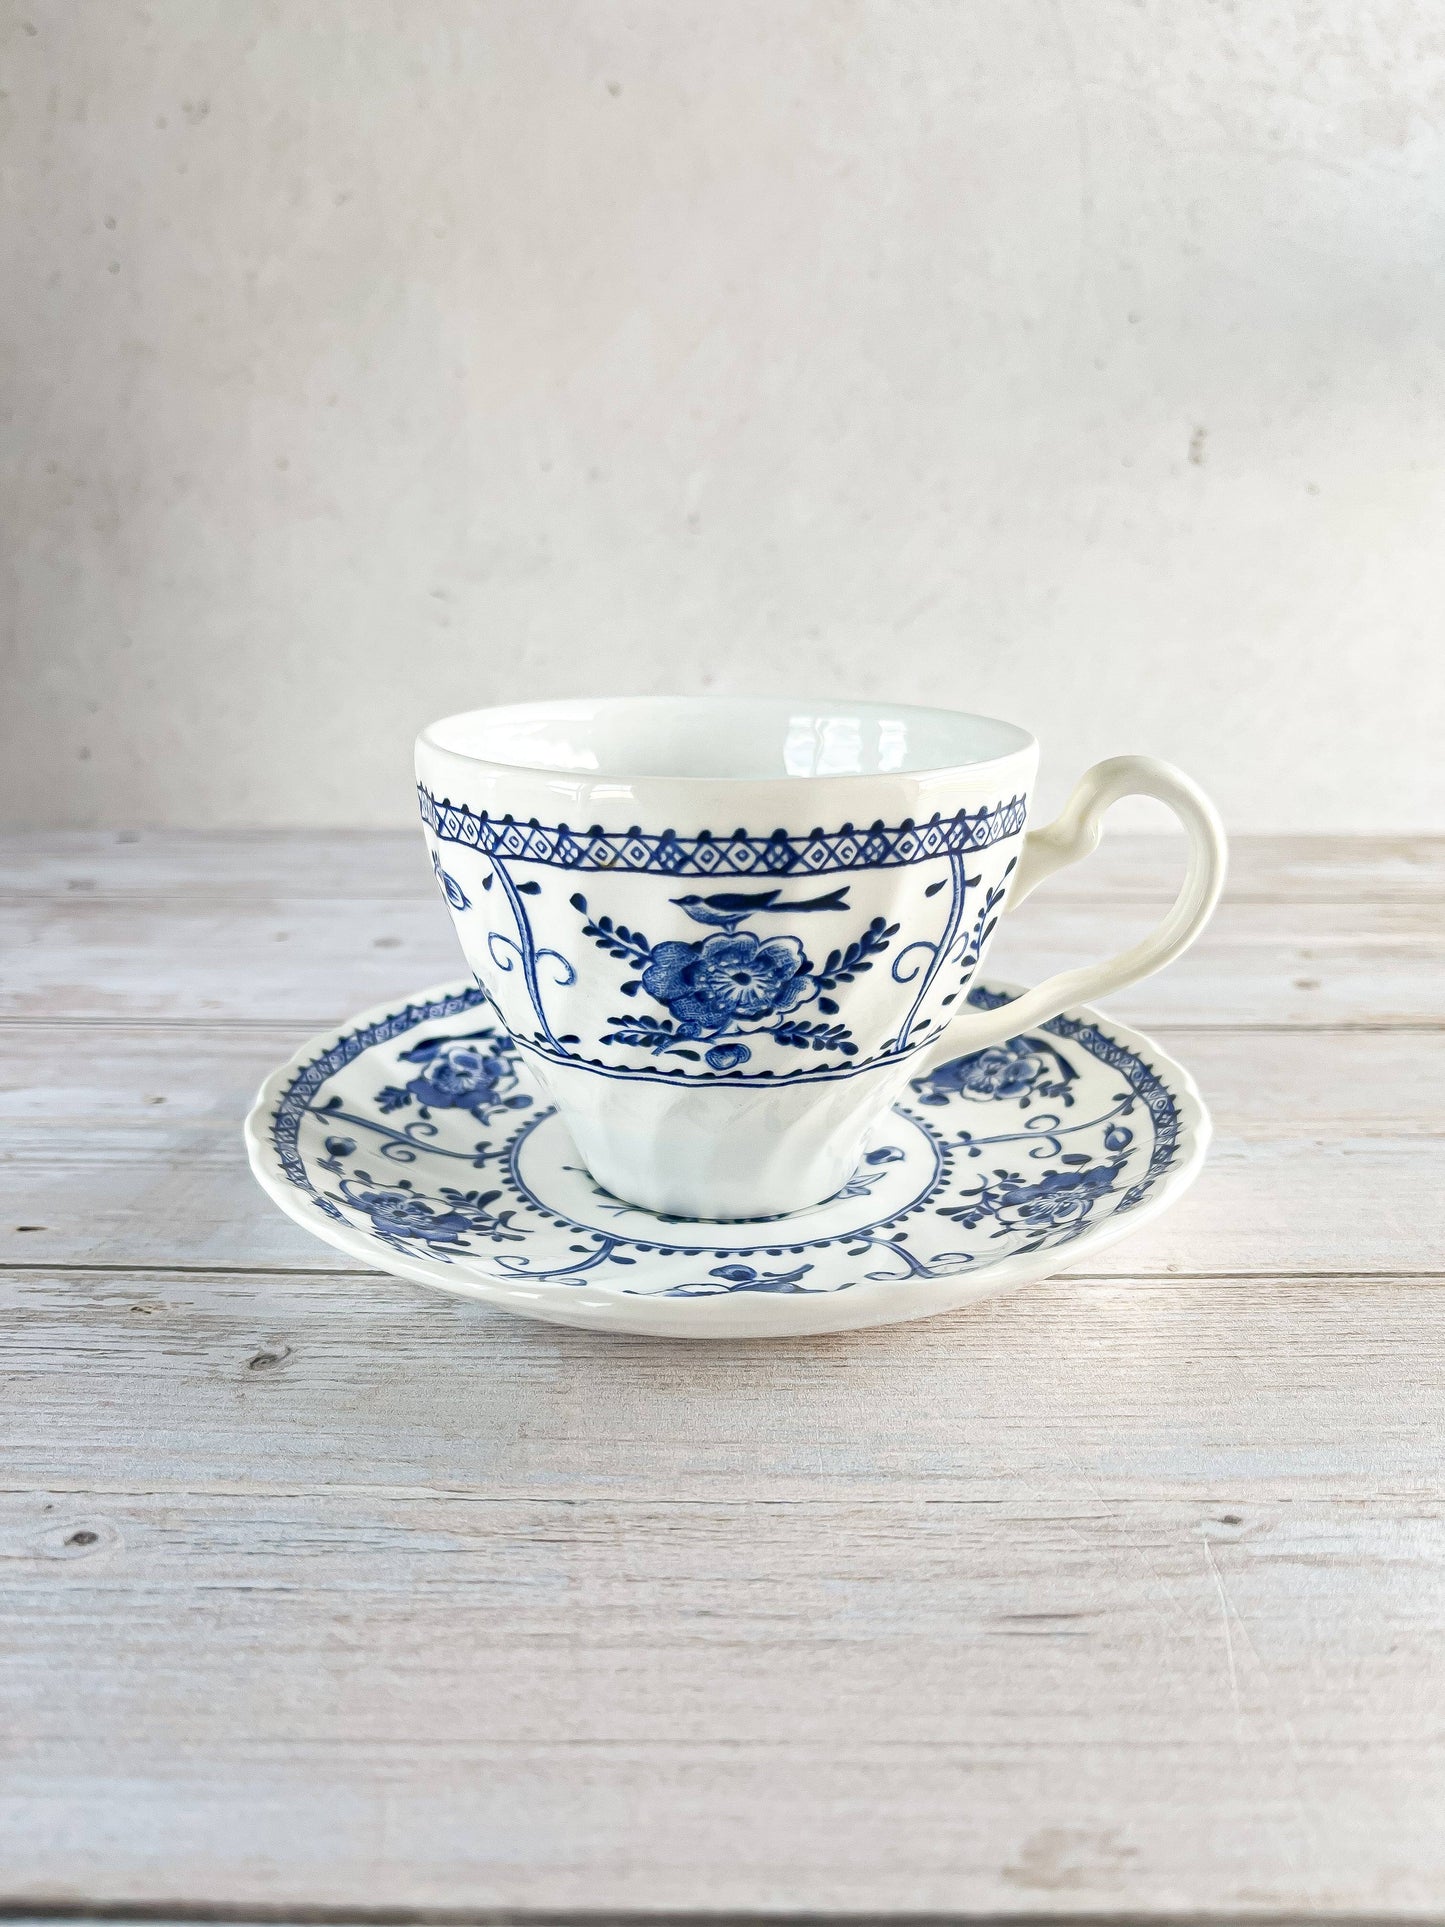 Johnson Bros 'Indies' in Blue Collection Flat Cup & Saucer Sets - Older and Modern Variants - SOSC Home